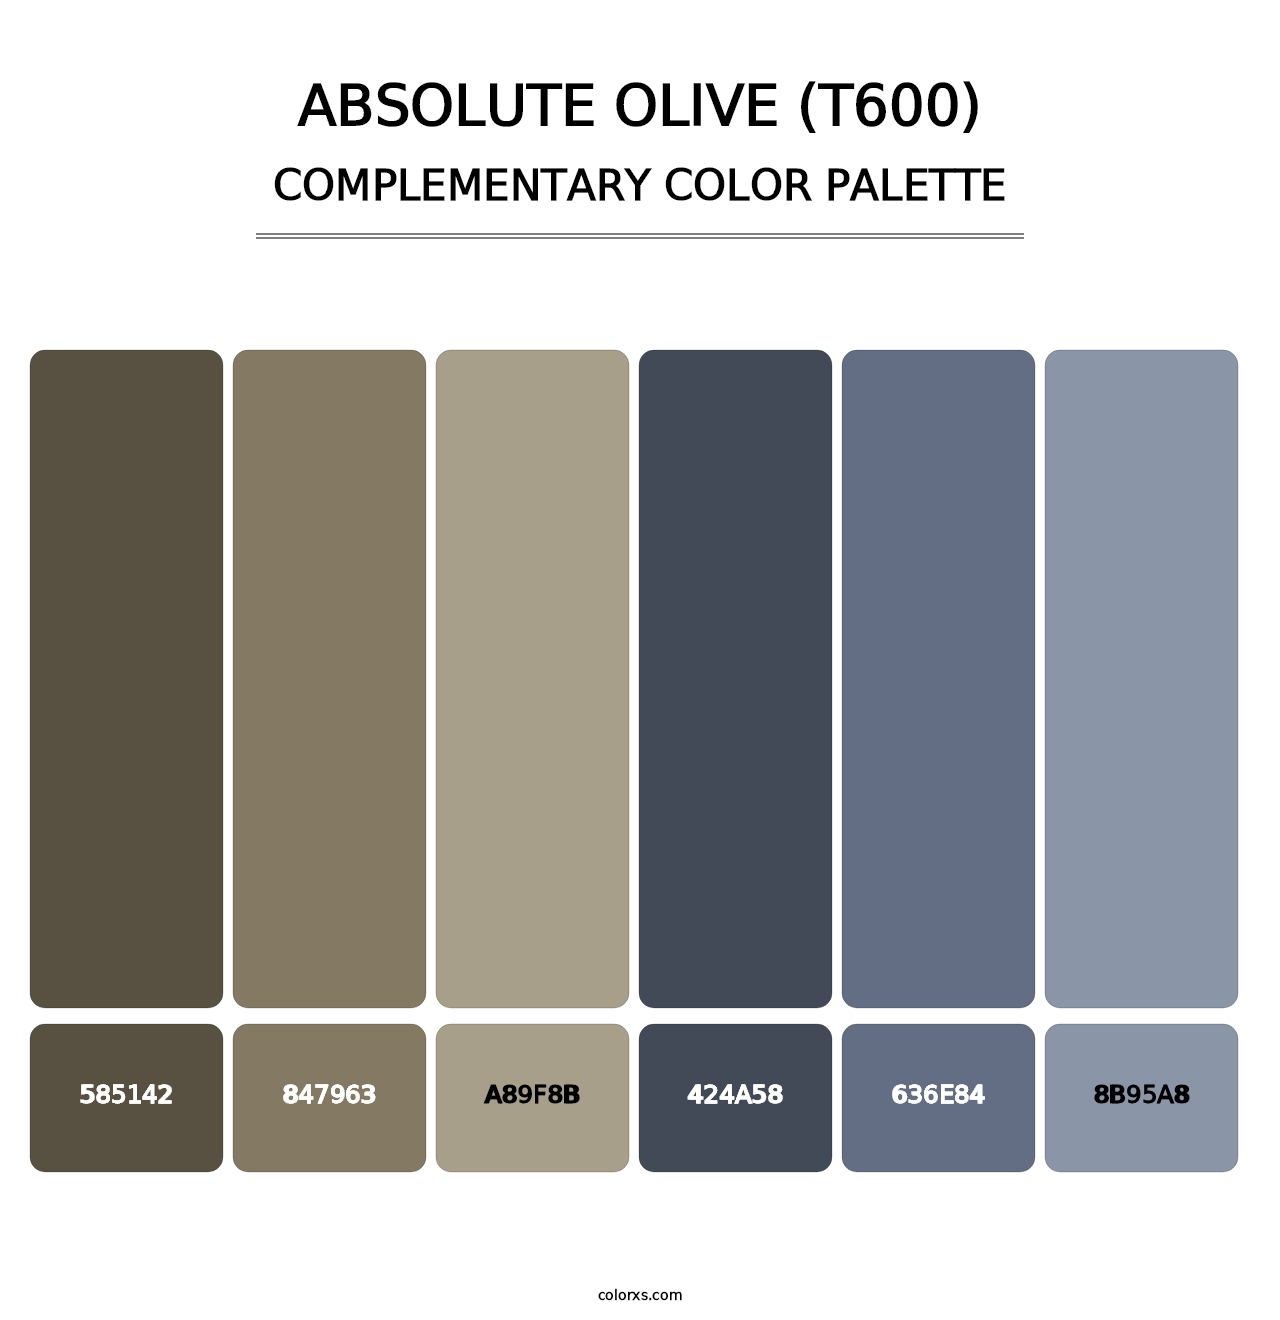 Absolute Olive (T600) - Complementary Color Palette